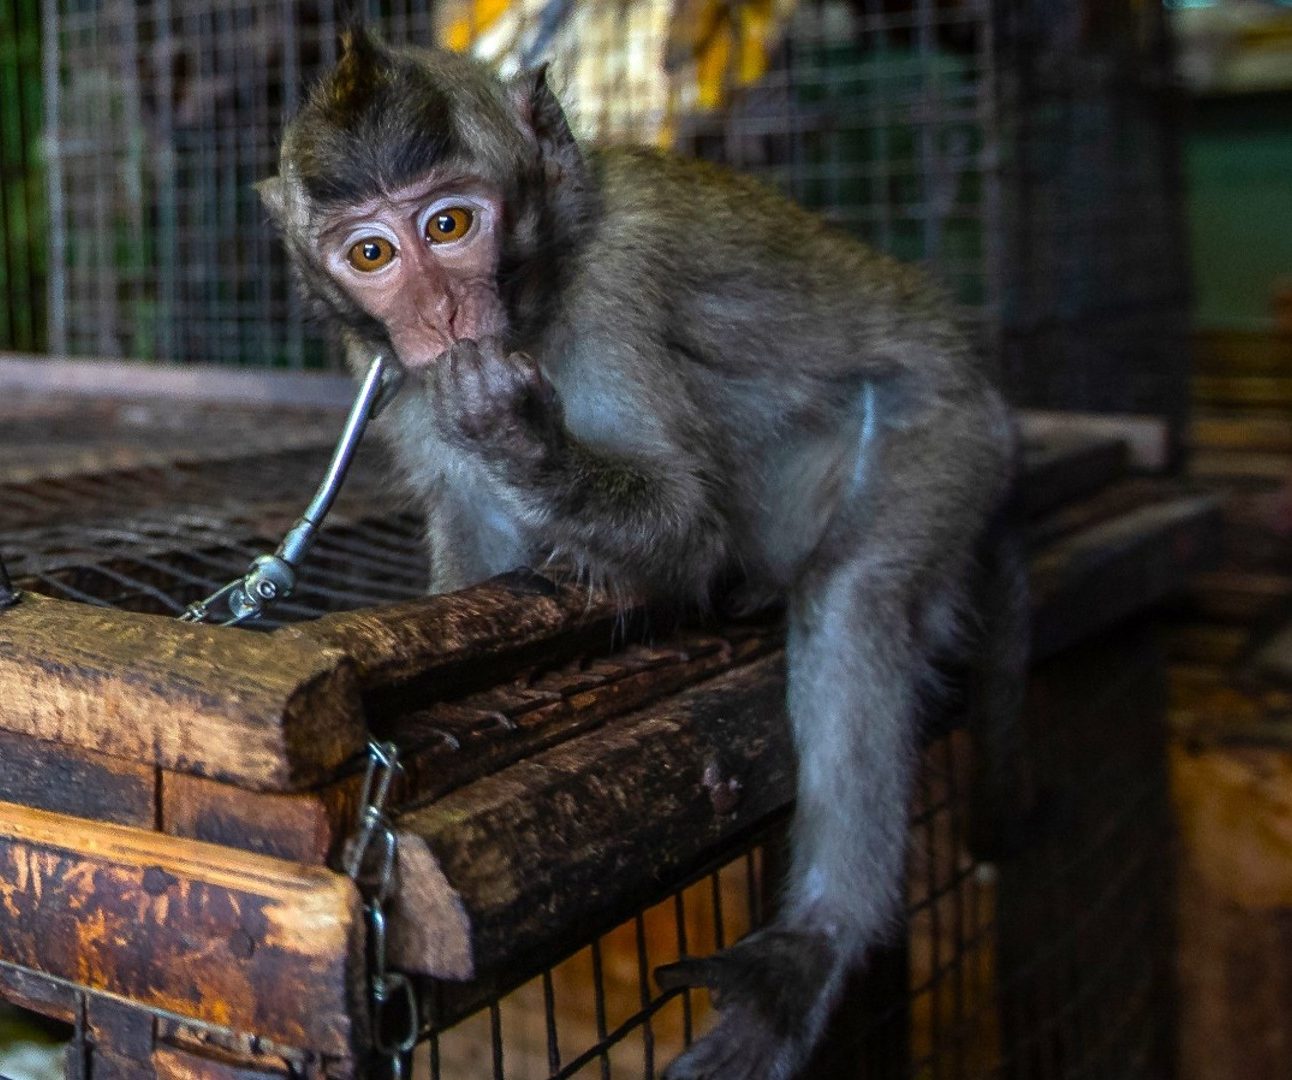 A monkey with a chain around its neck sits on top of a cage